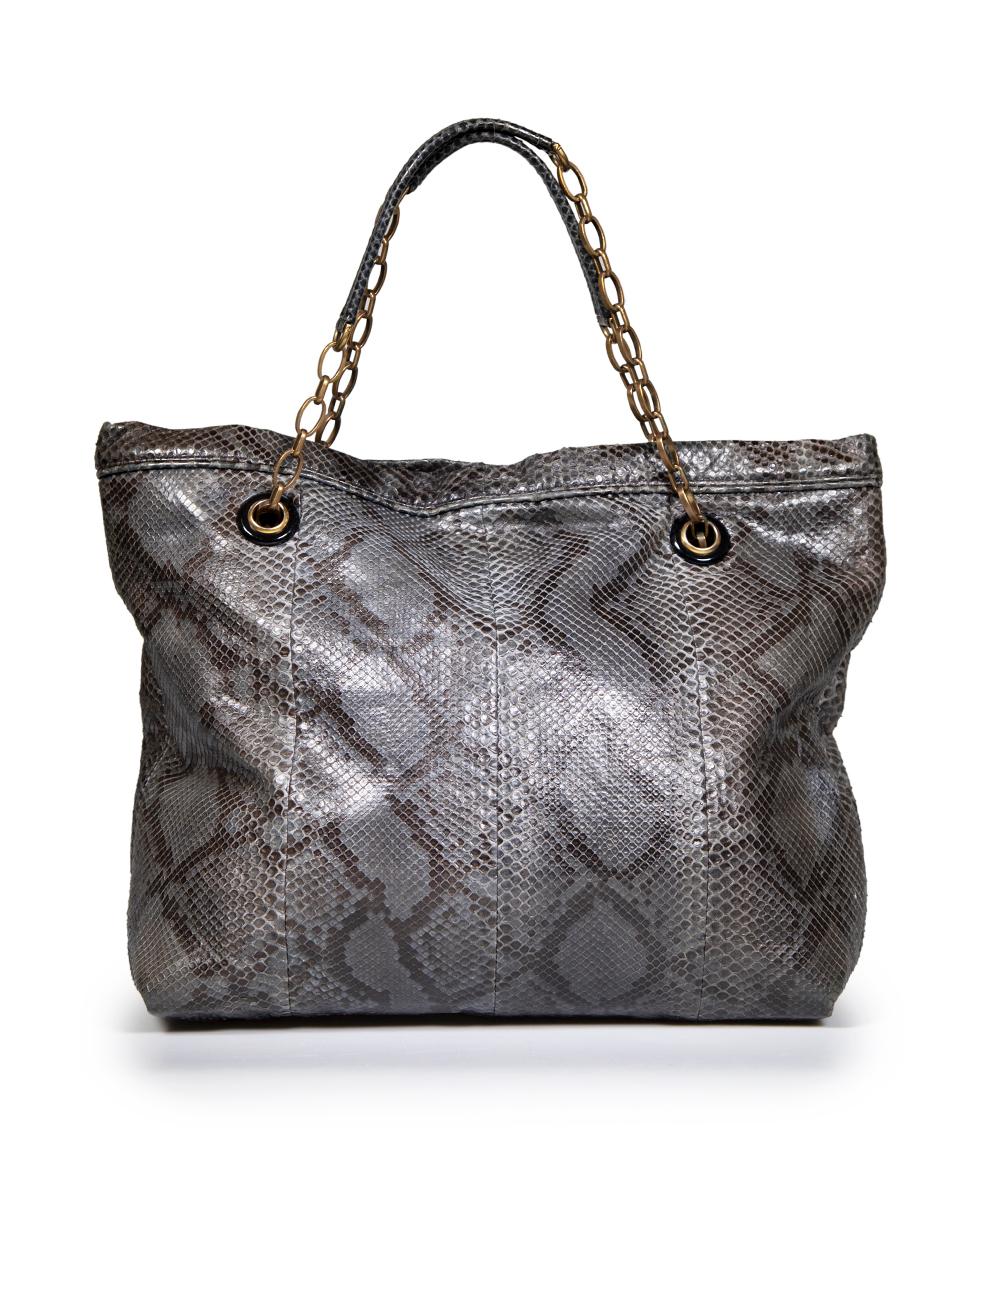 Lanvin Grey Snakeskin Happy Chain Handle Tote Bag In Good Condition For Sale In London, GB